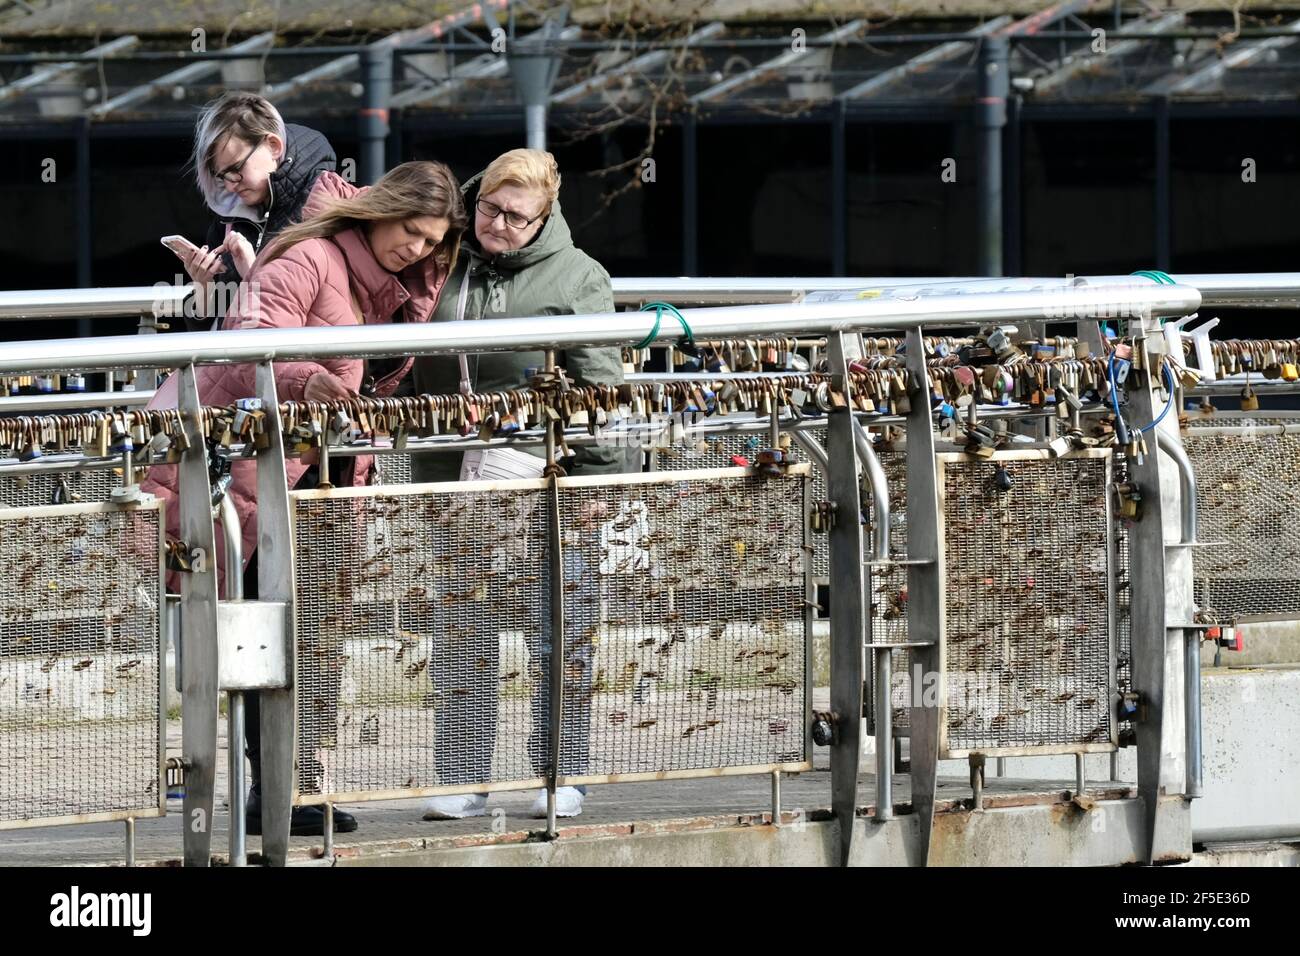 Bristol, UK. 26th Mar, 2021. People are out in the spring sunshine in Bristol despite Covid lockdown and recent protests. Two ladies checking the lovelocks on Pero's bridge in the sun. Credit: JMF News/Alamy Live News Stock Photo